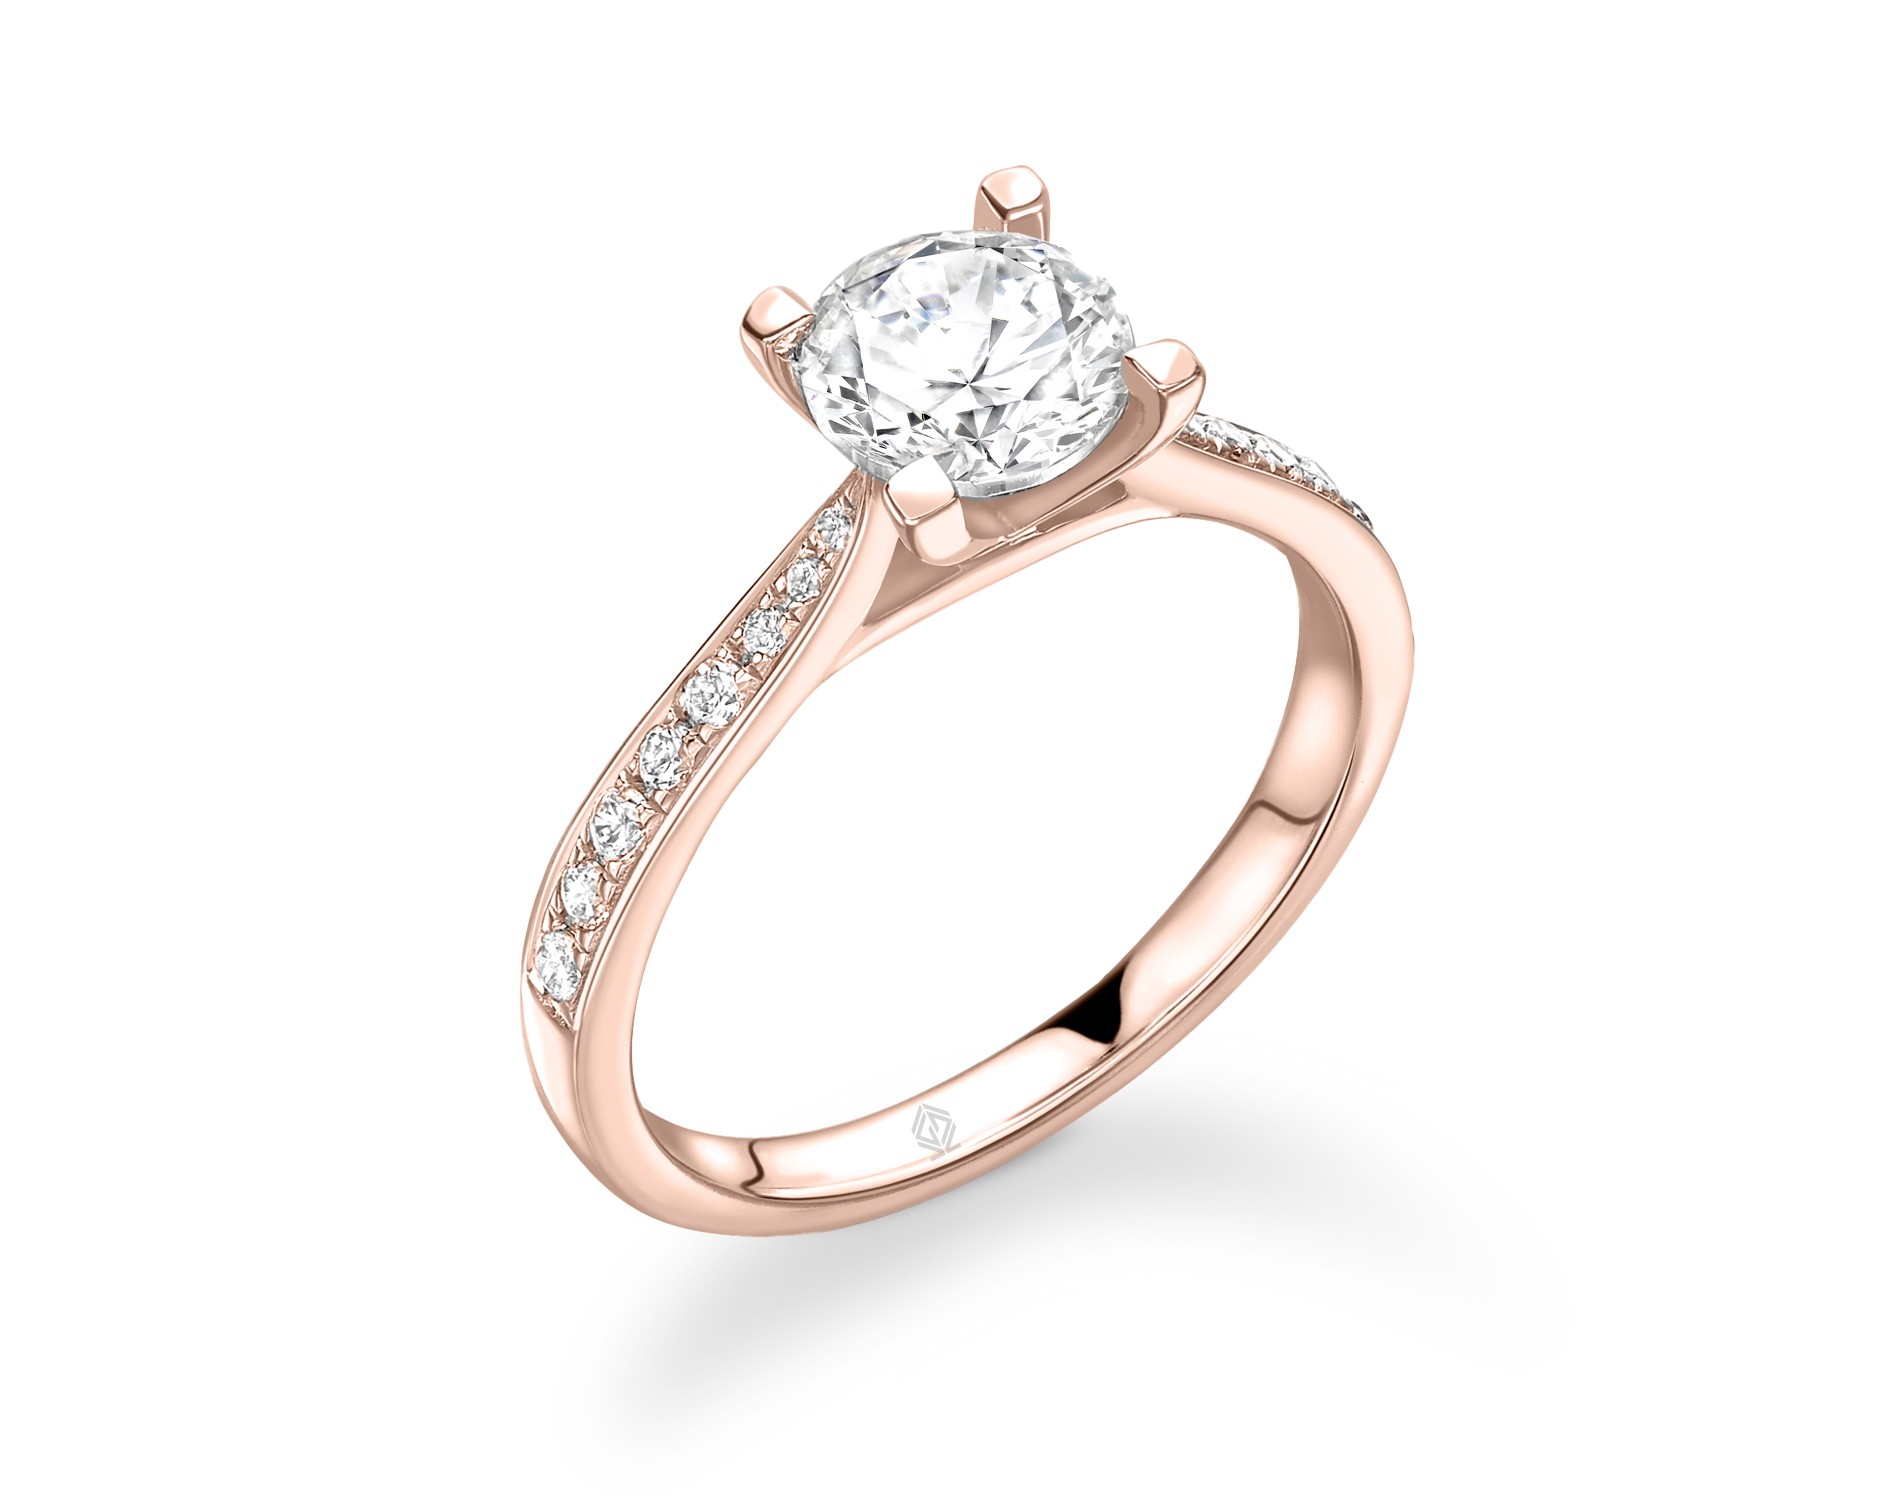 18K ROSE GOLD ROUND CUT 4 PRONGS DIAMOND ENGAGEMENT RING WITH SIDE STONES CHANNEL SET